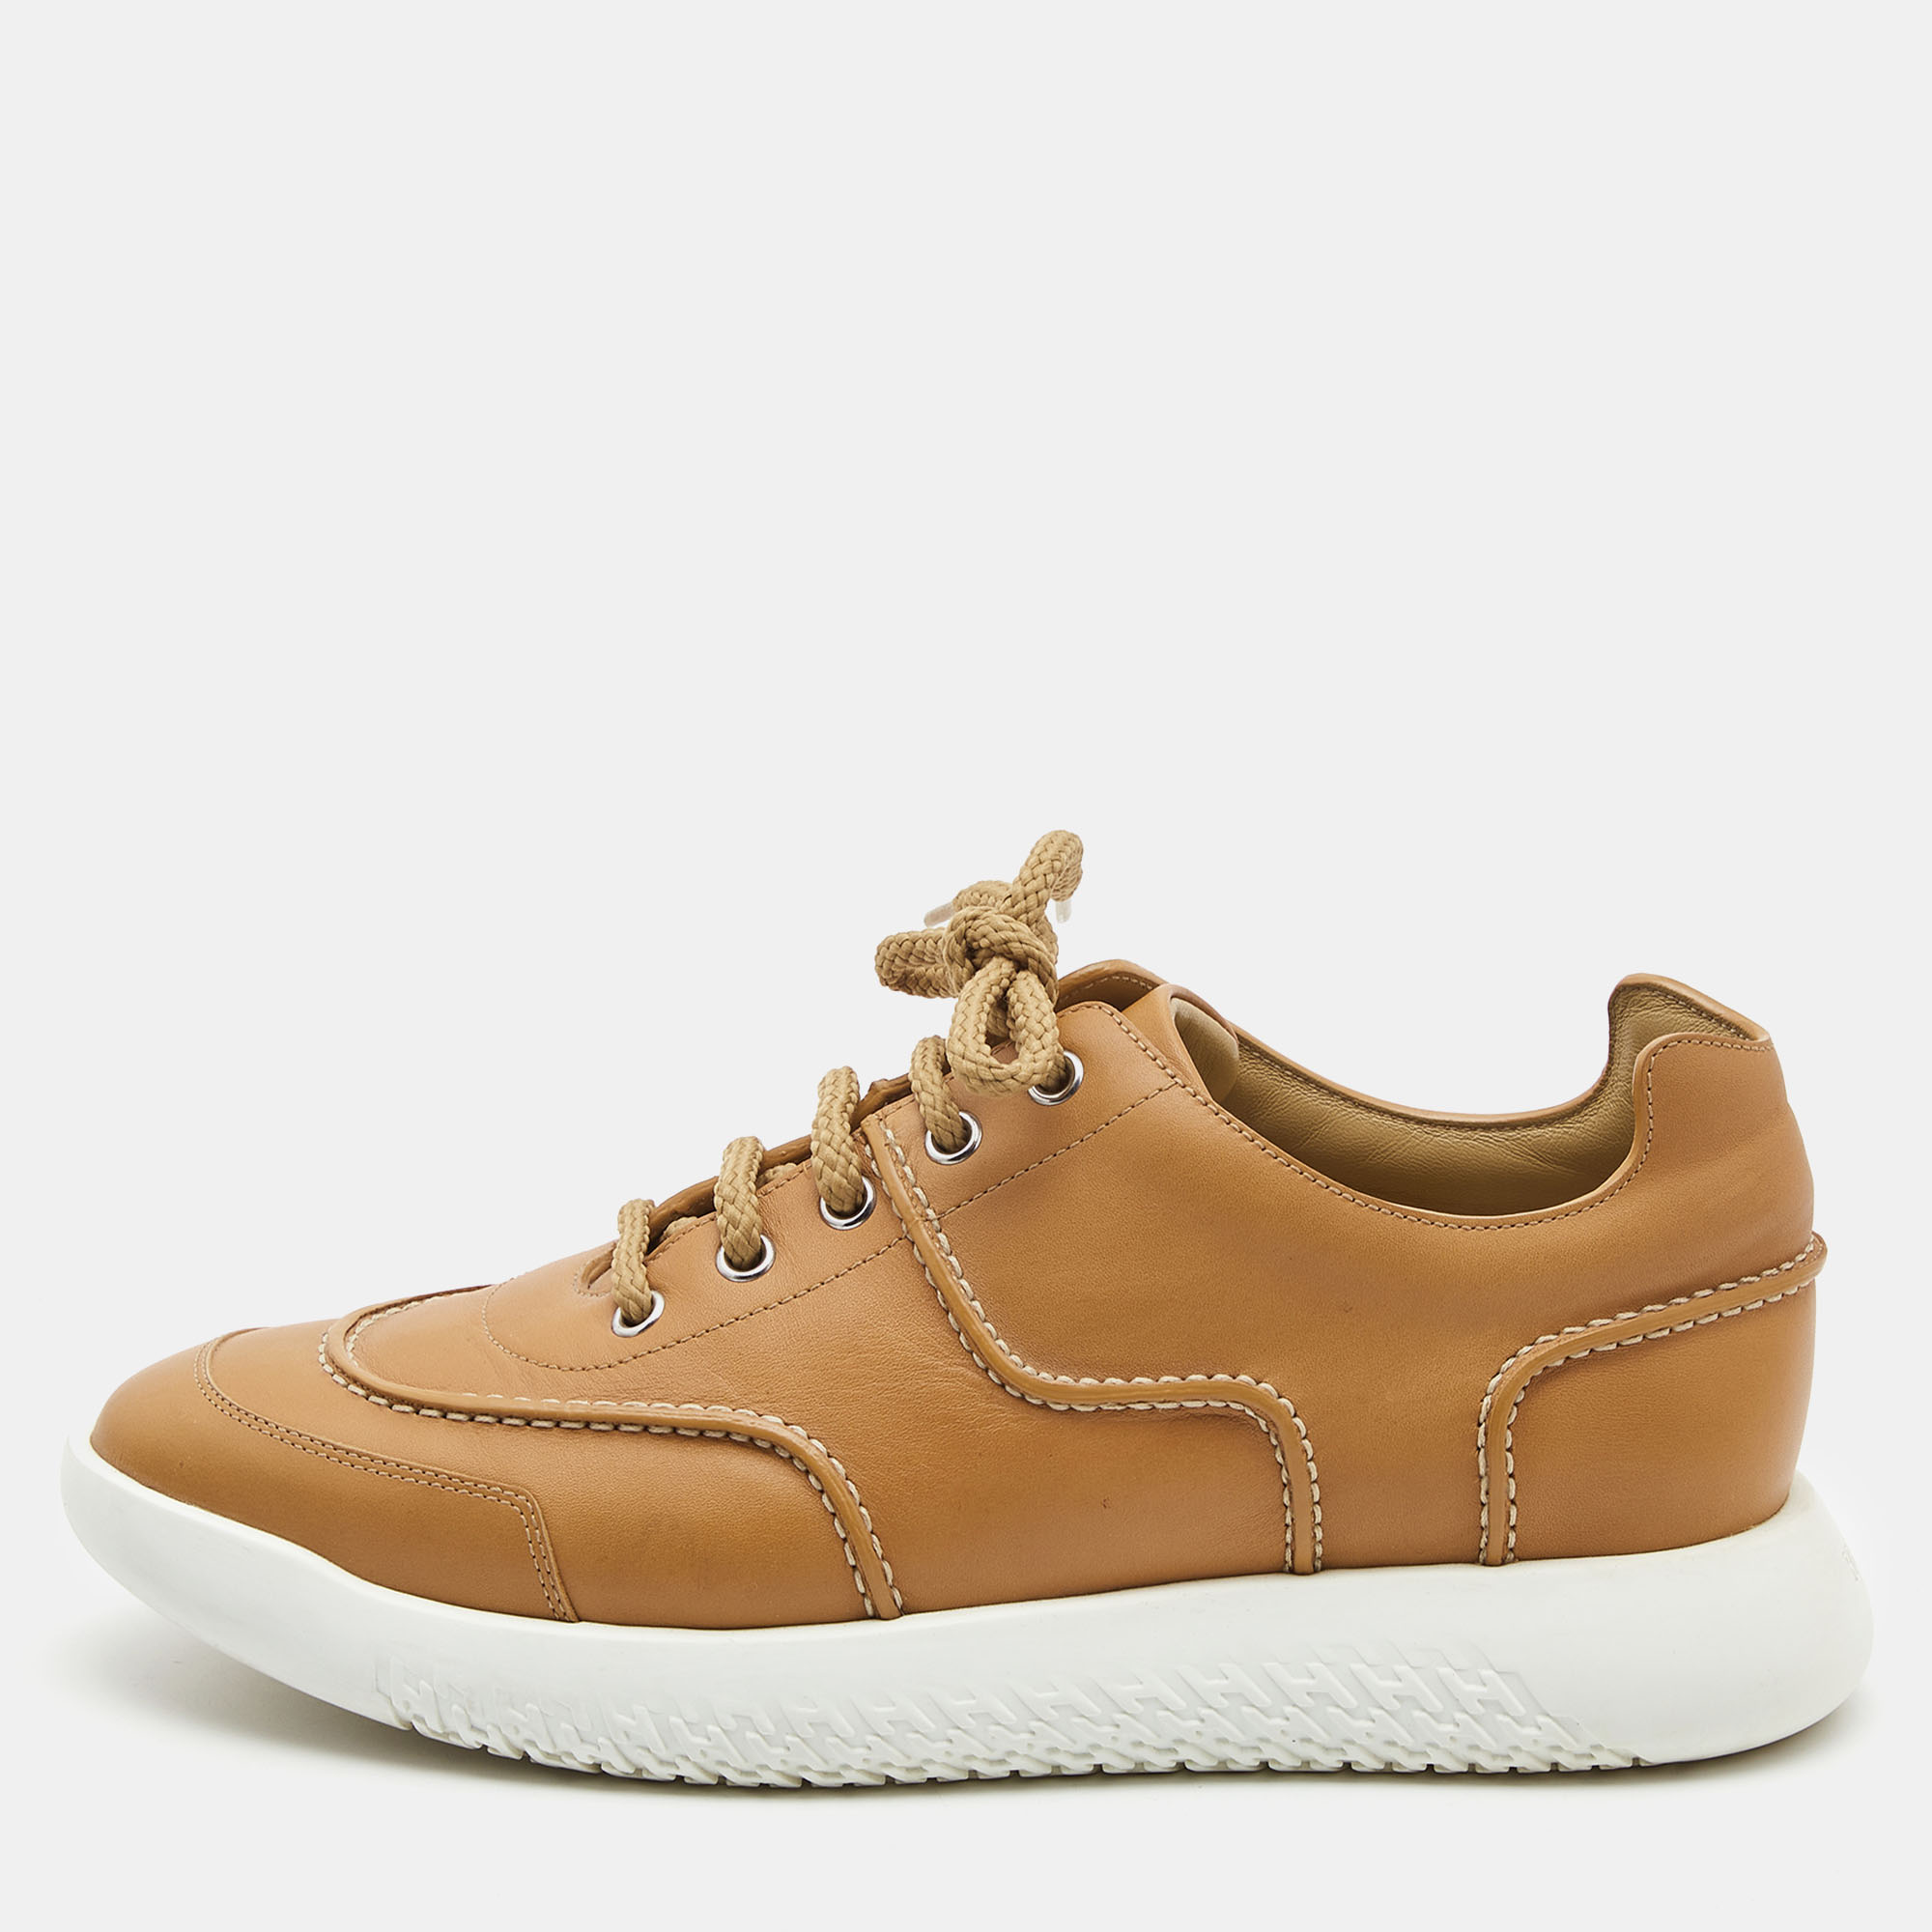 Hermes Tan Leather Low Top Sneakers Size 40